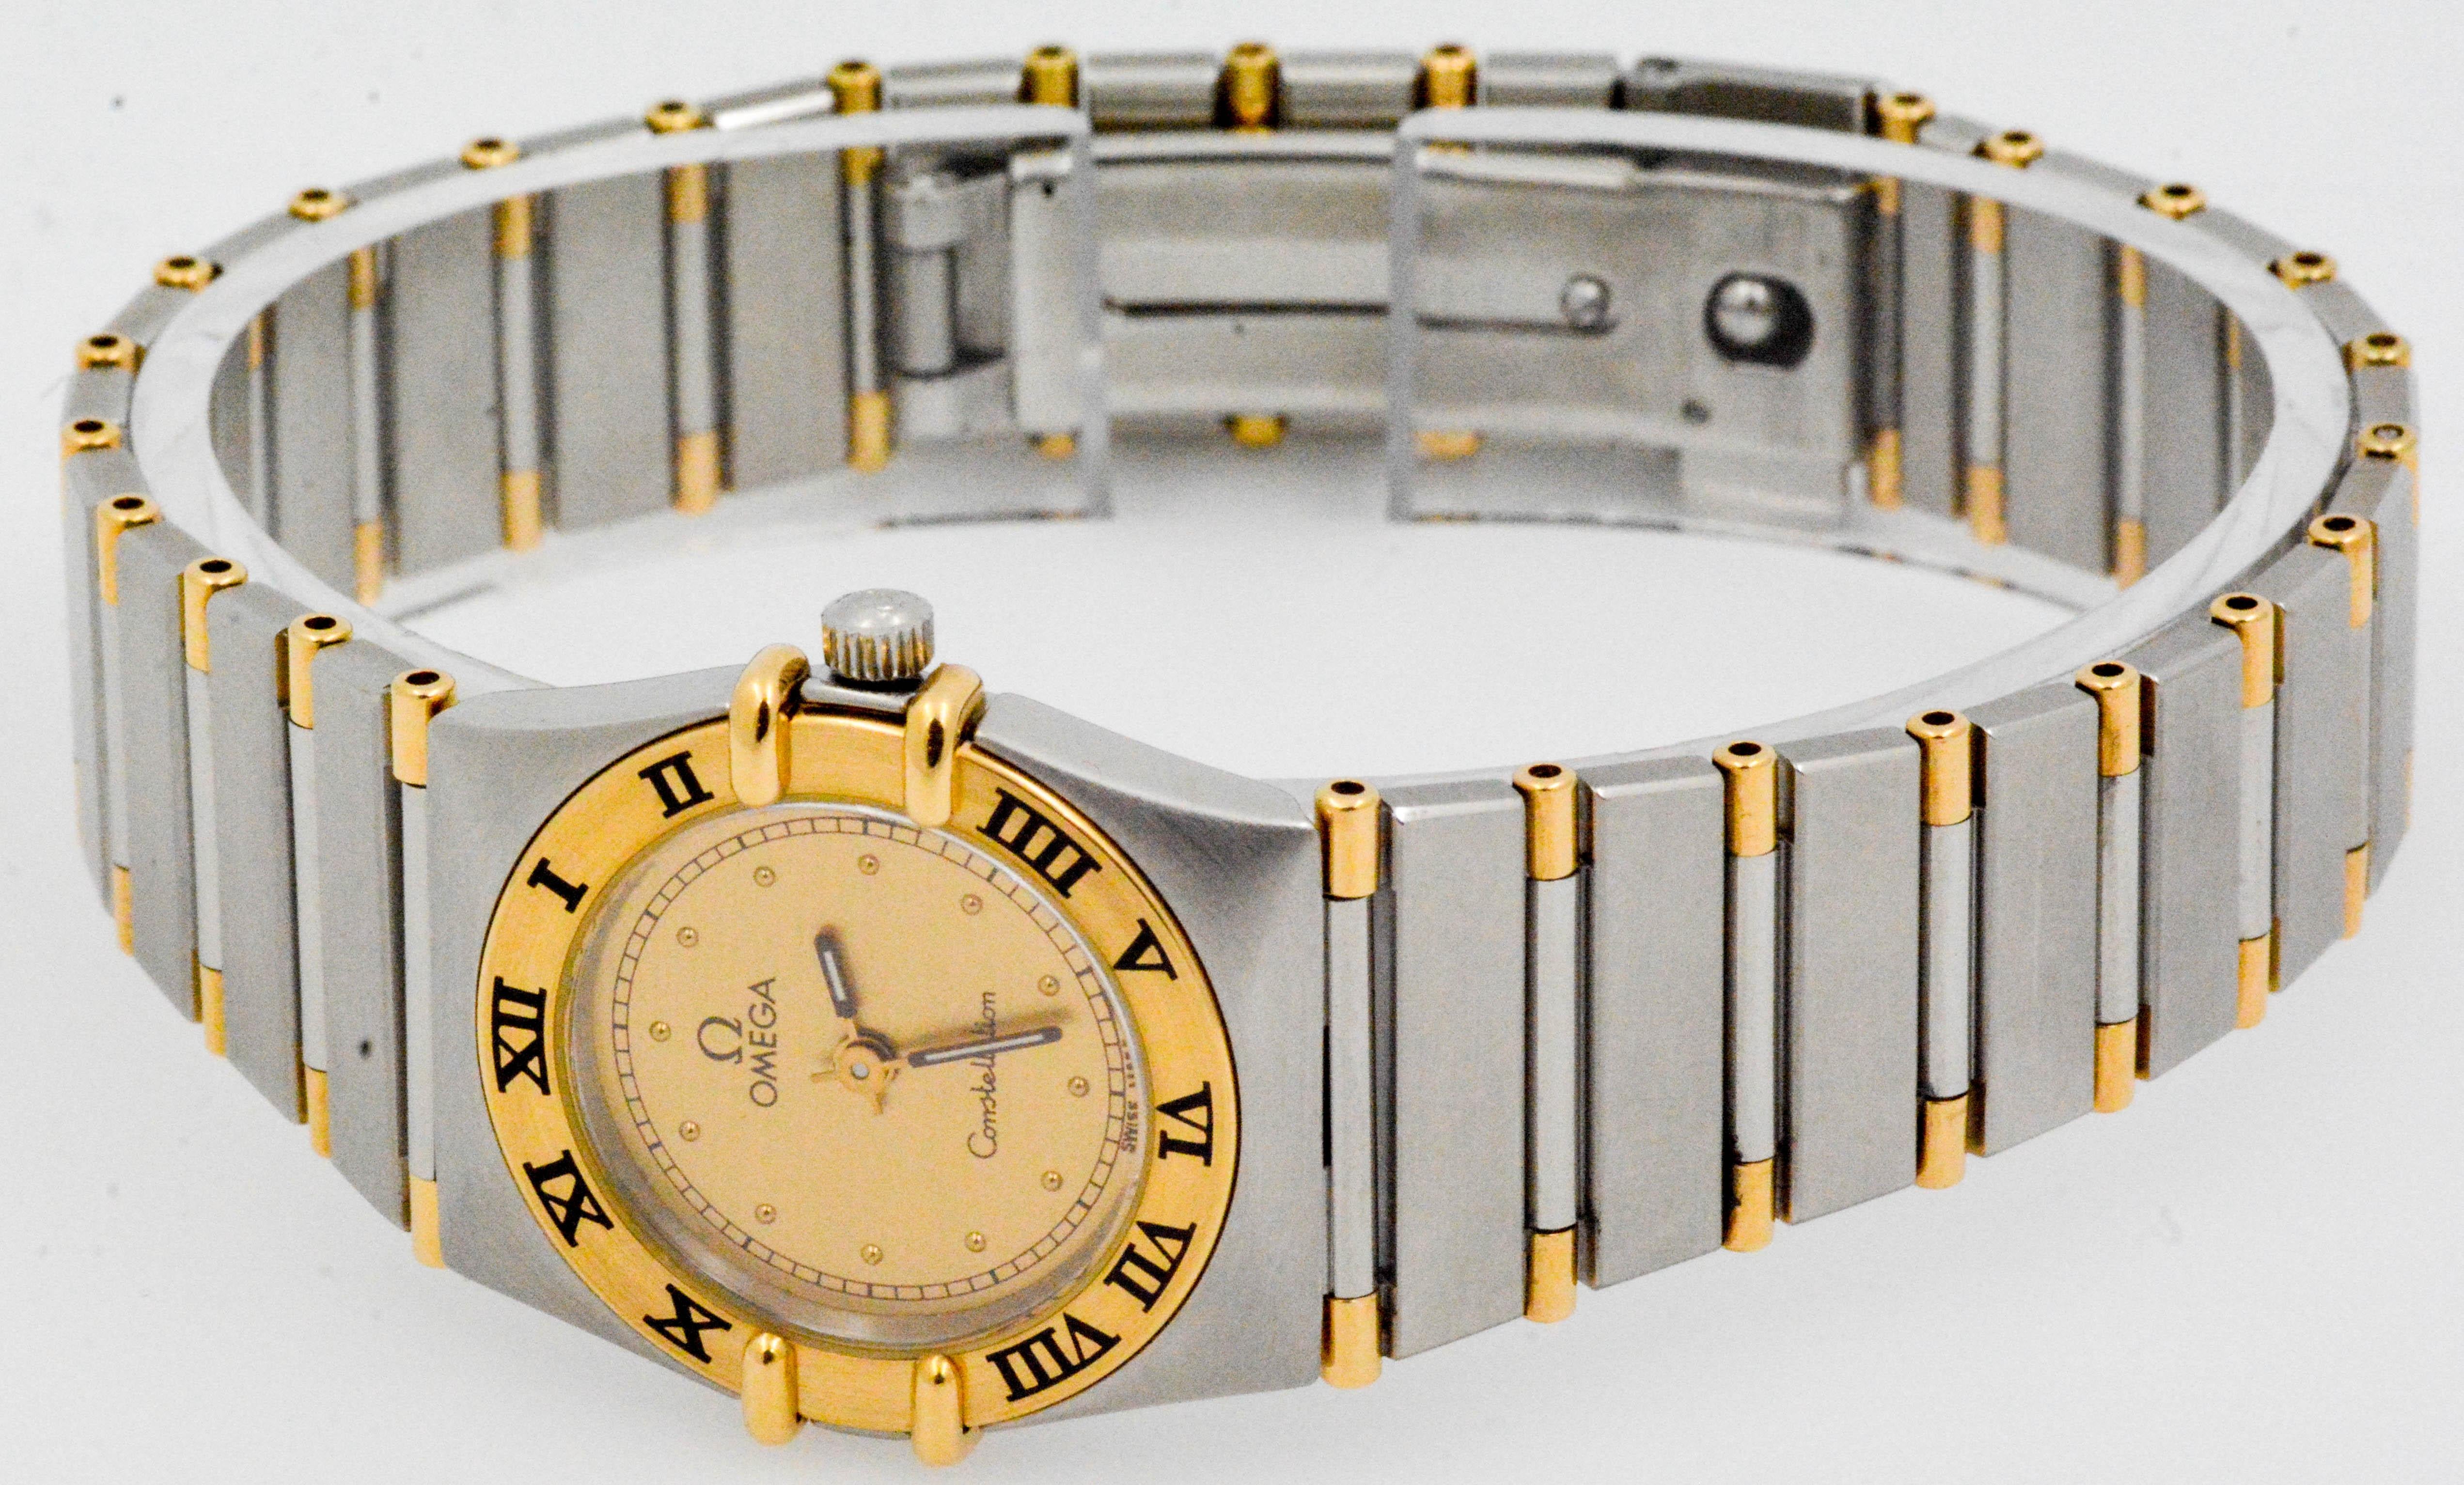 An eye catching Omega two-color wristwatch in stainless steel and 18K yellow gold. This same gold is used for the hands as well as for the polished bars within the stainless steel bracelet. The watch is further distinguished by its iconic